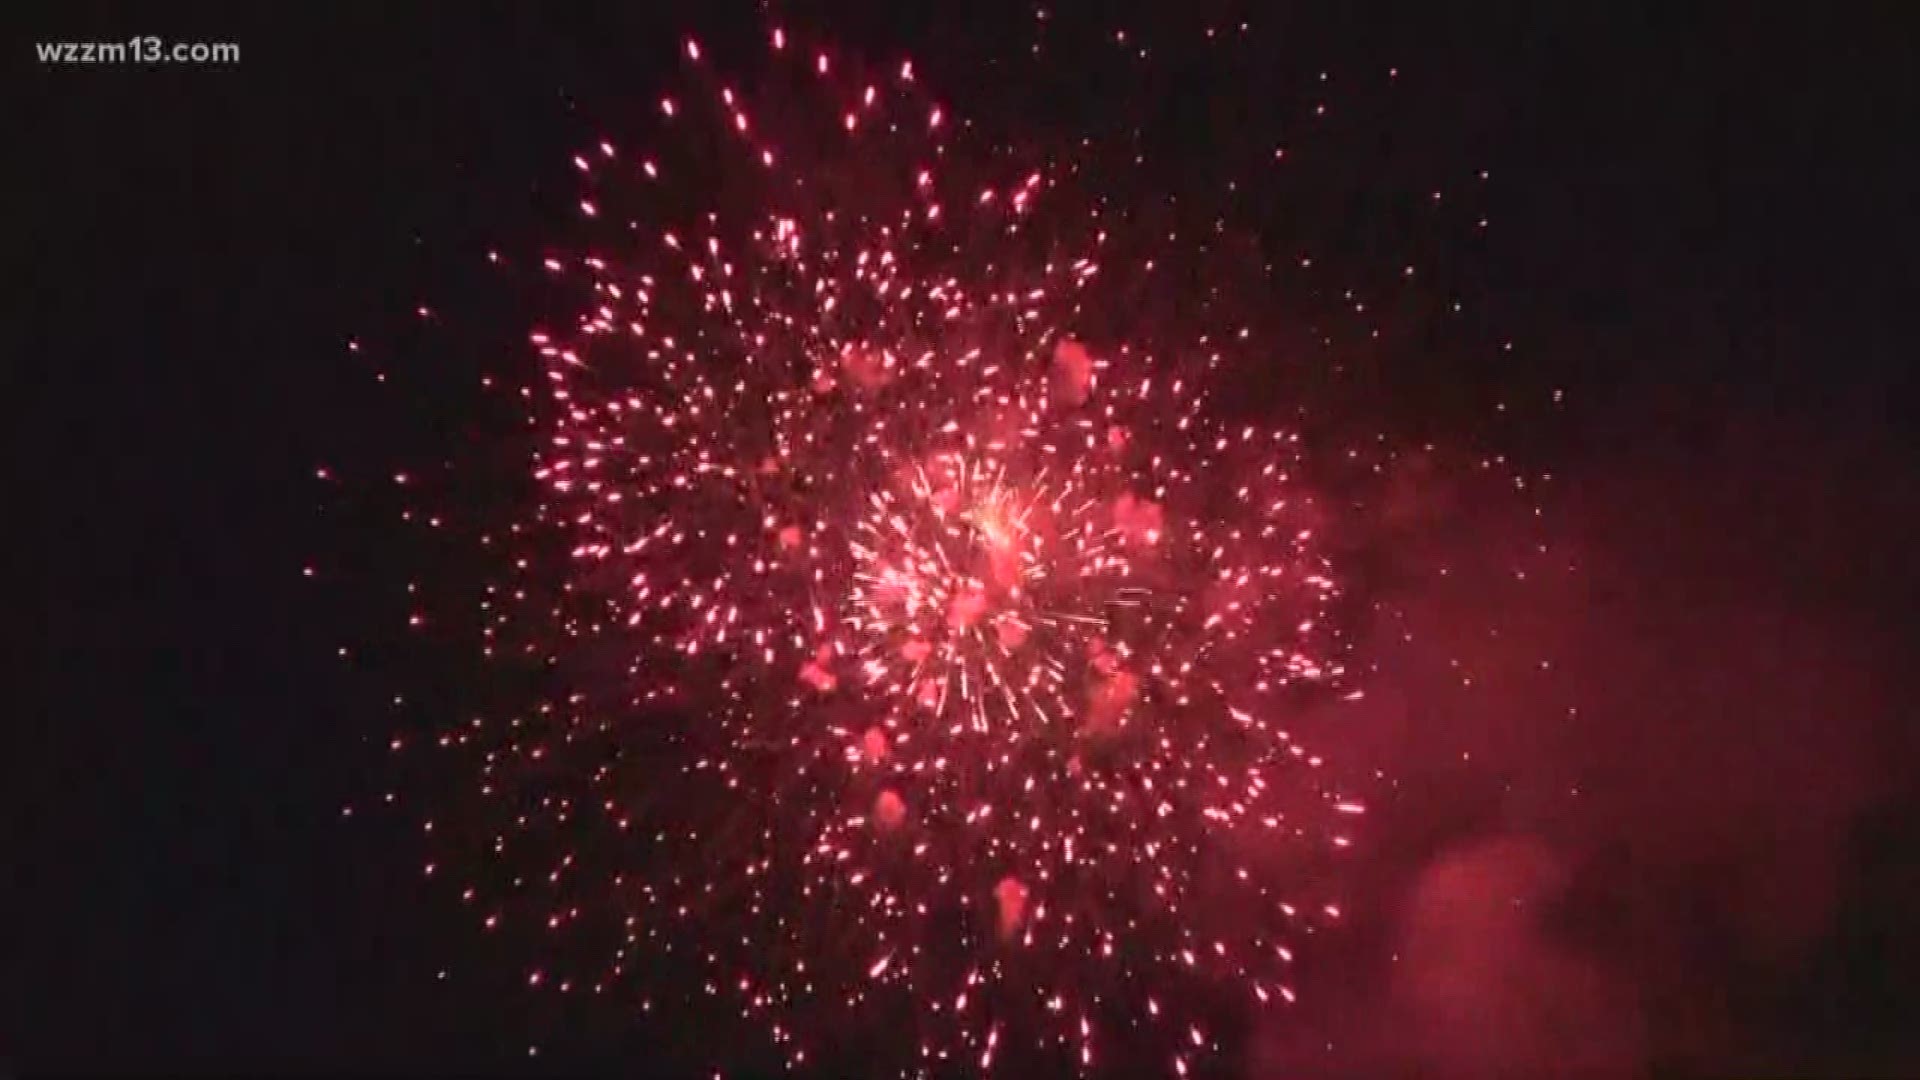 4th of July fireworks safety and the DNR